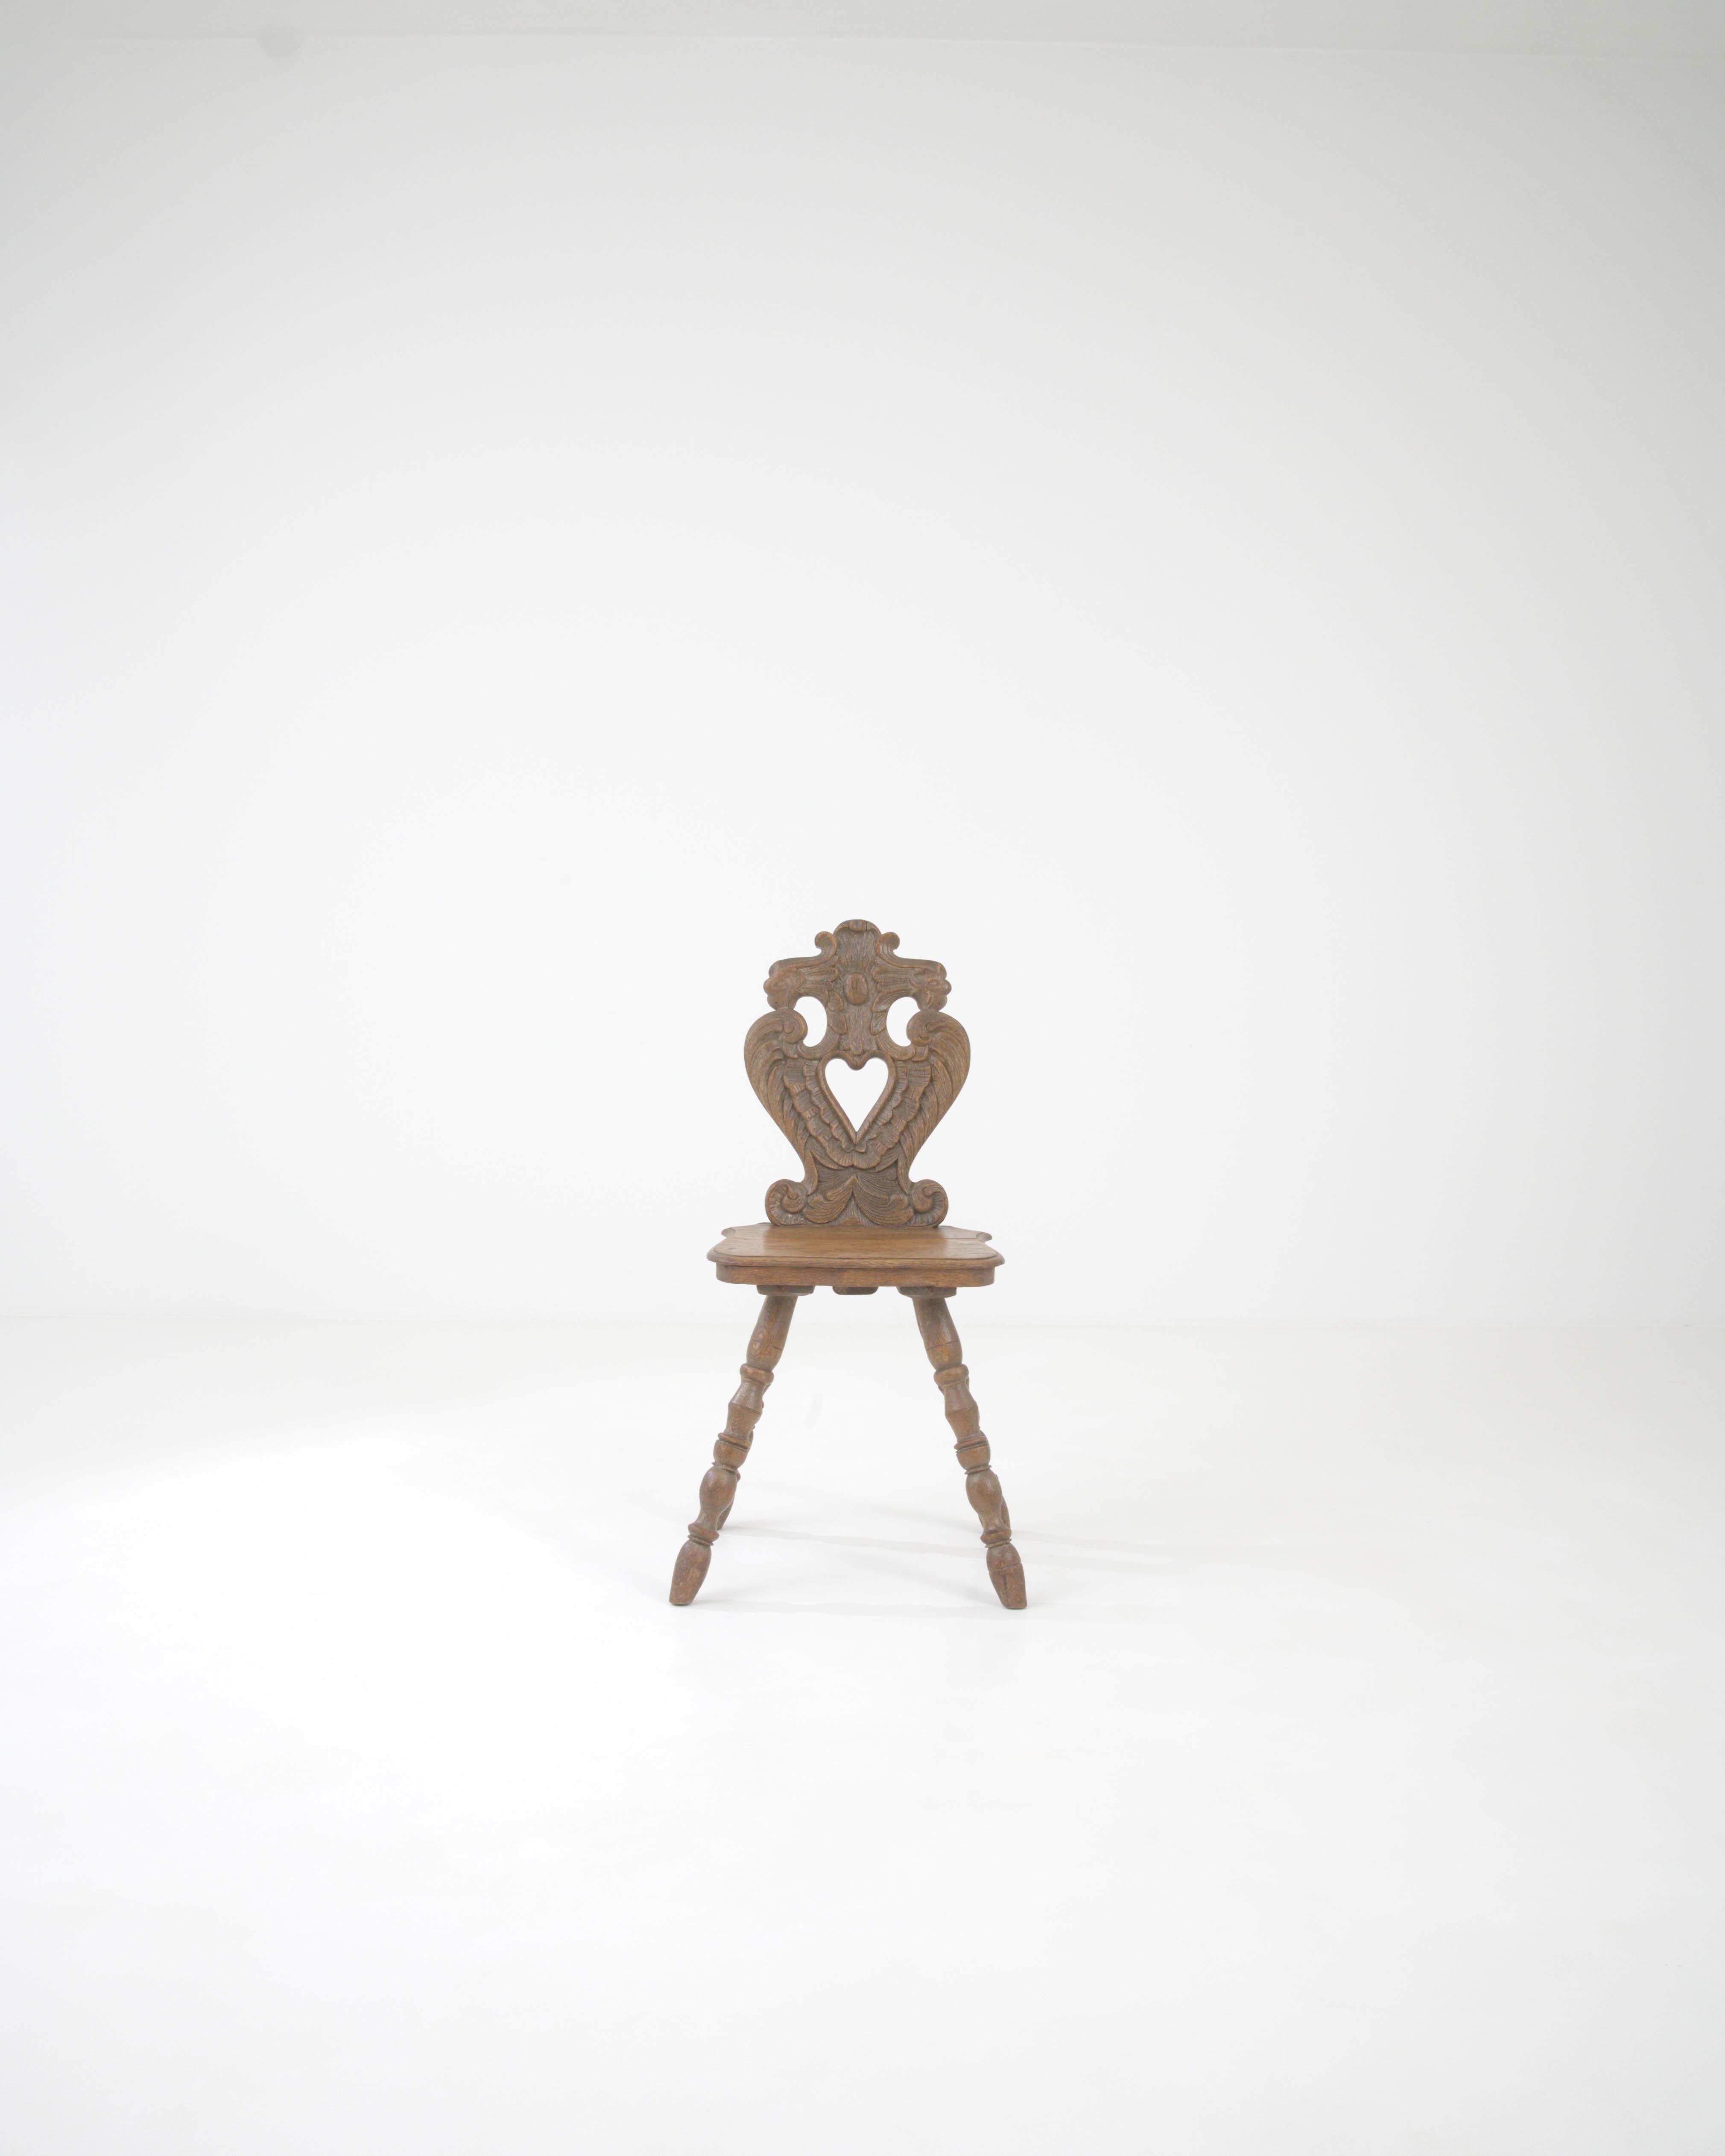 Step back in time with this exquisitely crafted 19th Century French Wooden Chair, a statement piece that embodies the elegance of historical French design. The chair's heart-shaped backrest, adorned with intricate carvings, showcases the meticulous